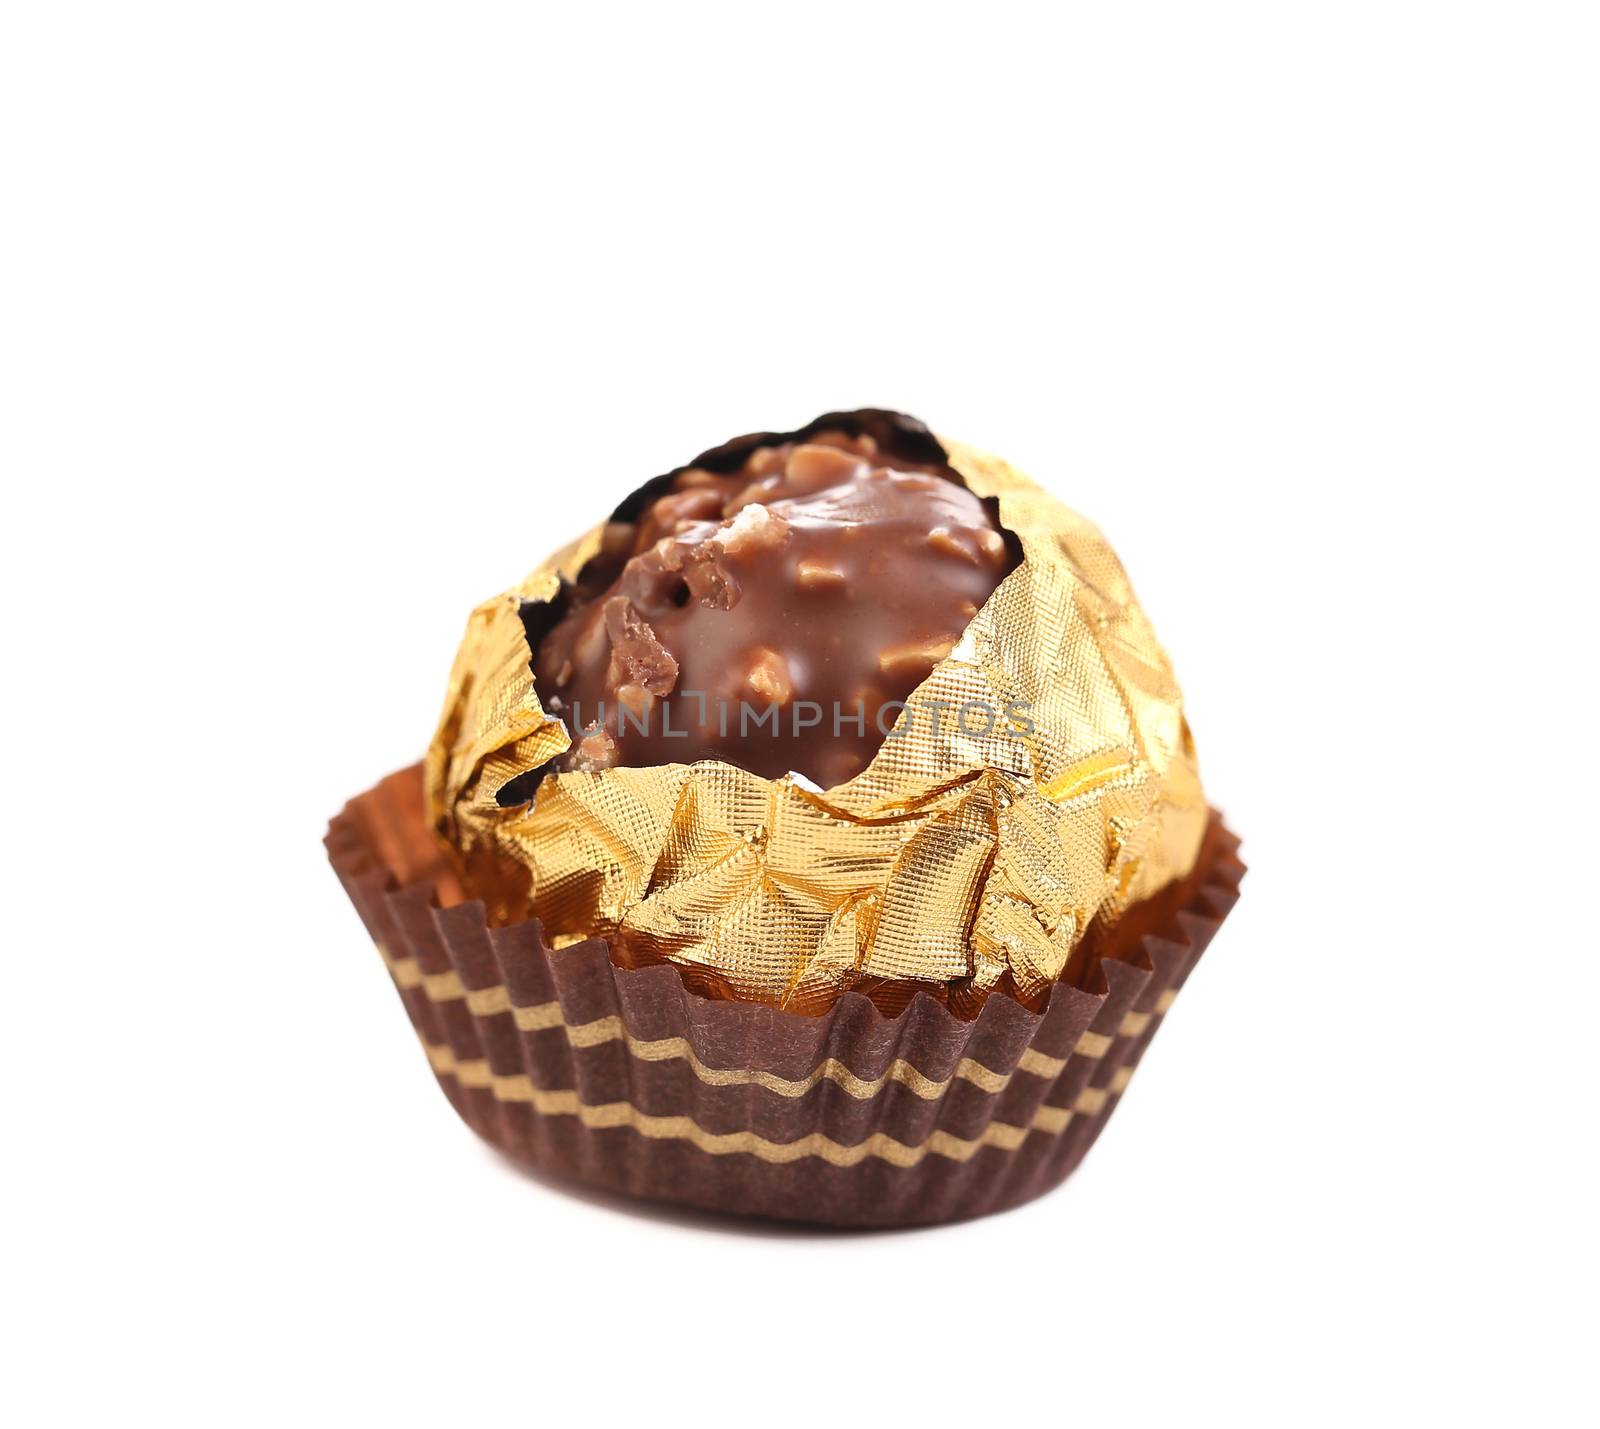 Chocolate gold foil bonbon. Isolated on a white background.